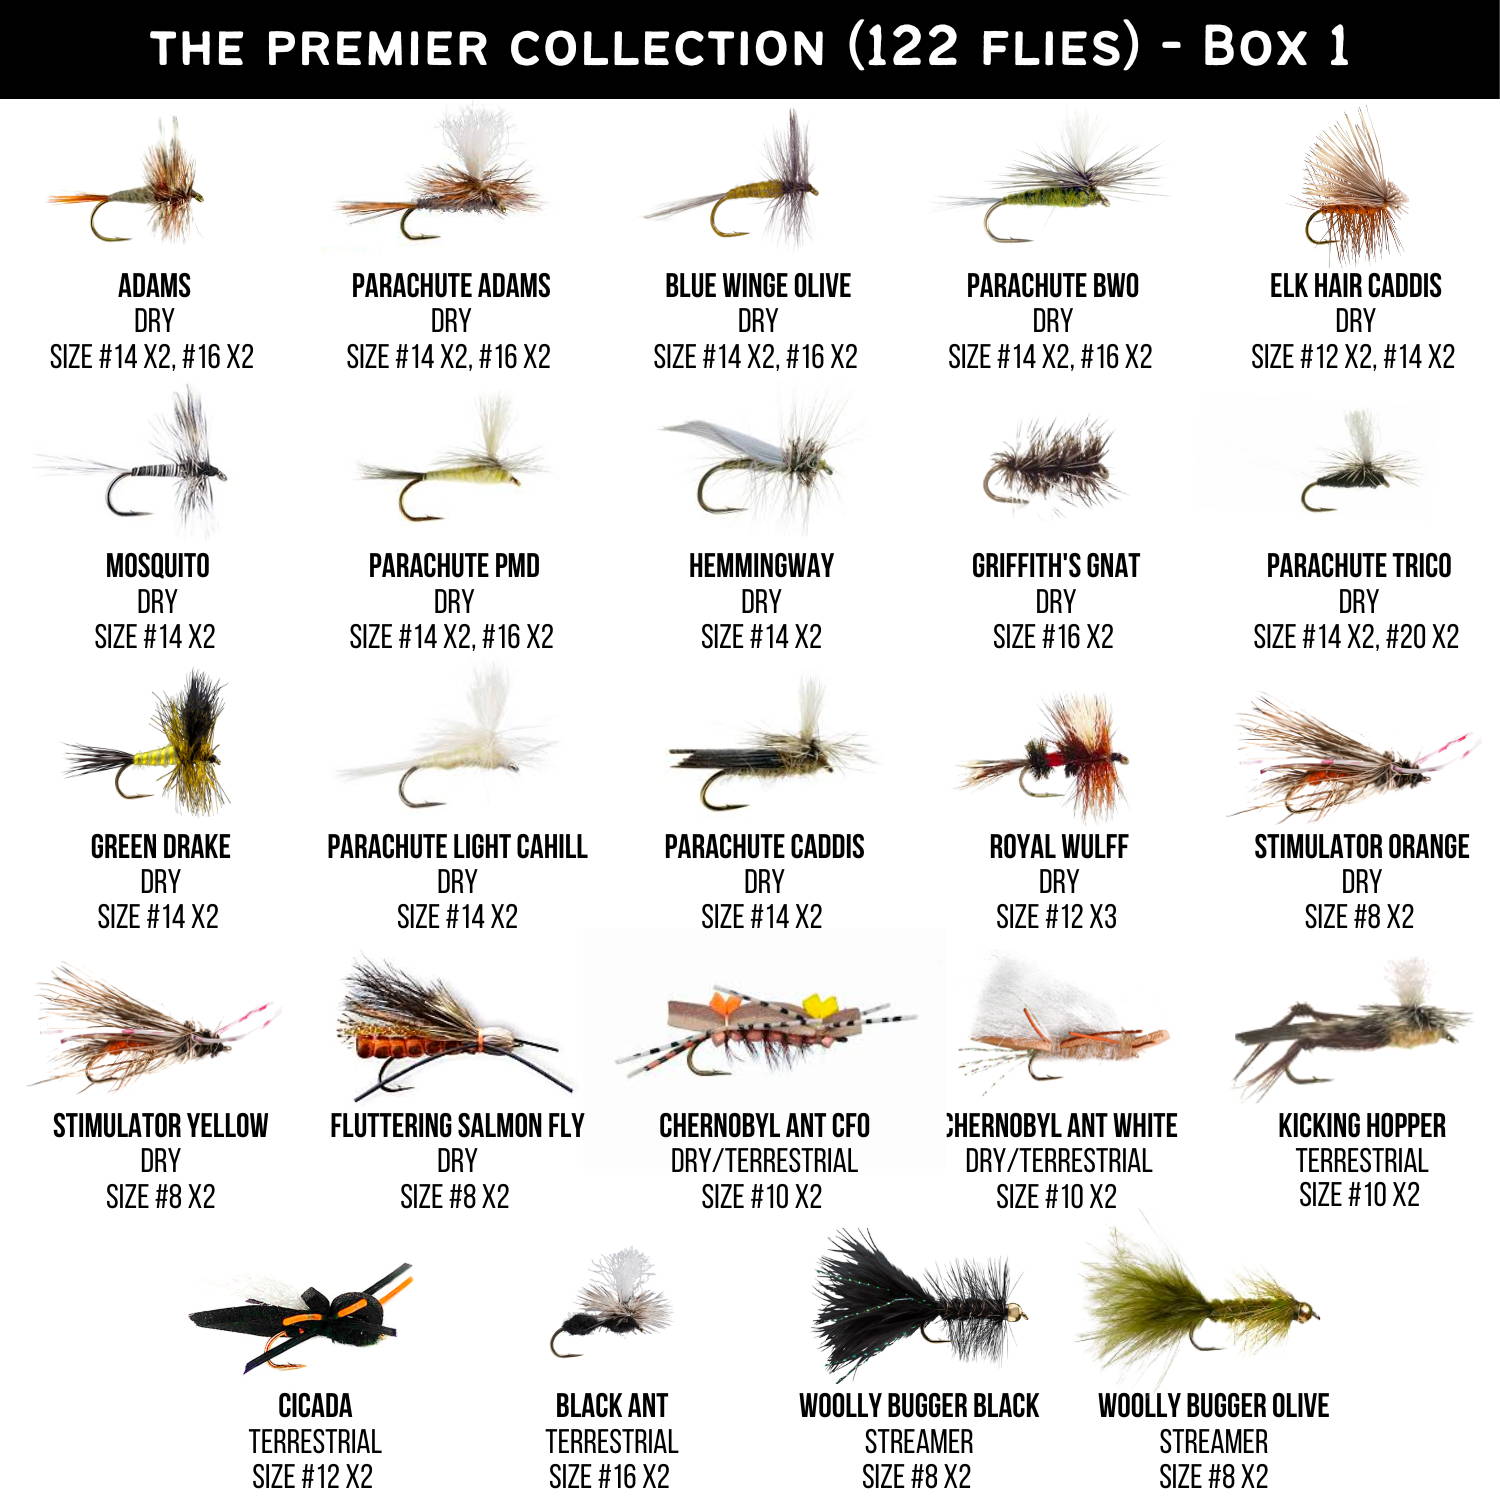 Fly Trout Fly fishing Flies Assortment Artificial Bait with Wet Fly Ho –  Shopeazy